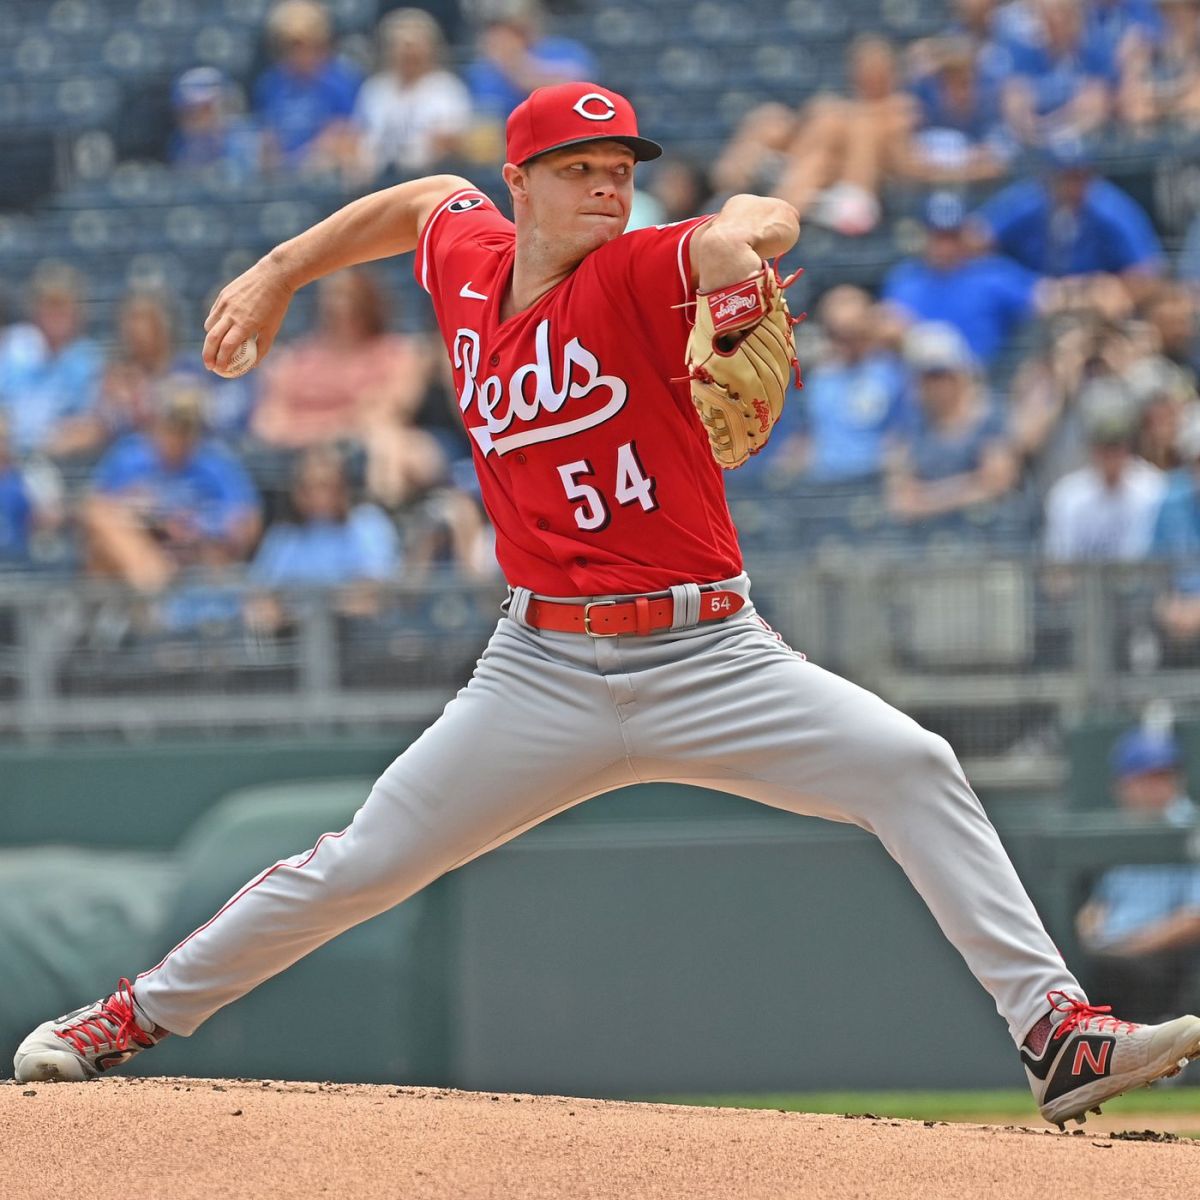 Cincinnati Reds' Sonny Gray traded to Minnesota Twins for Chase Petty